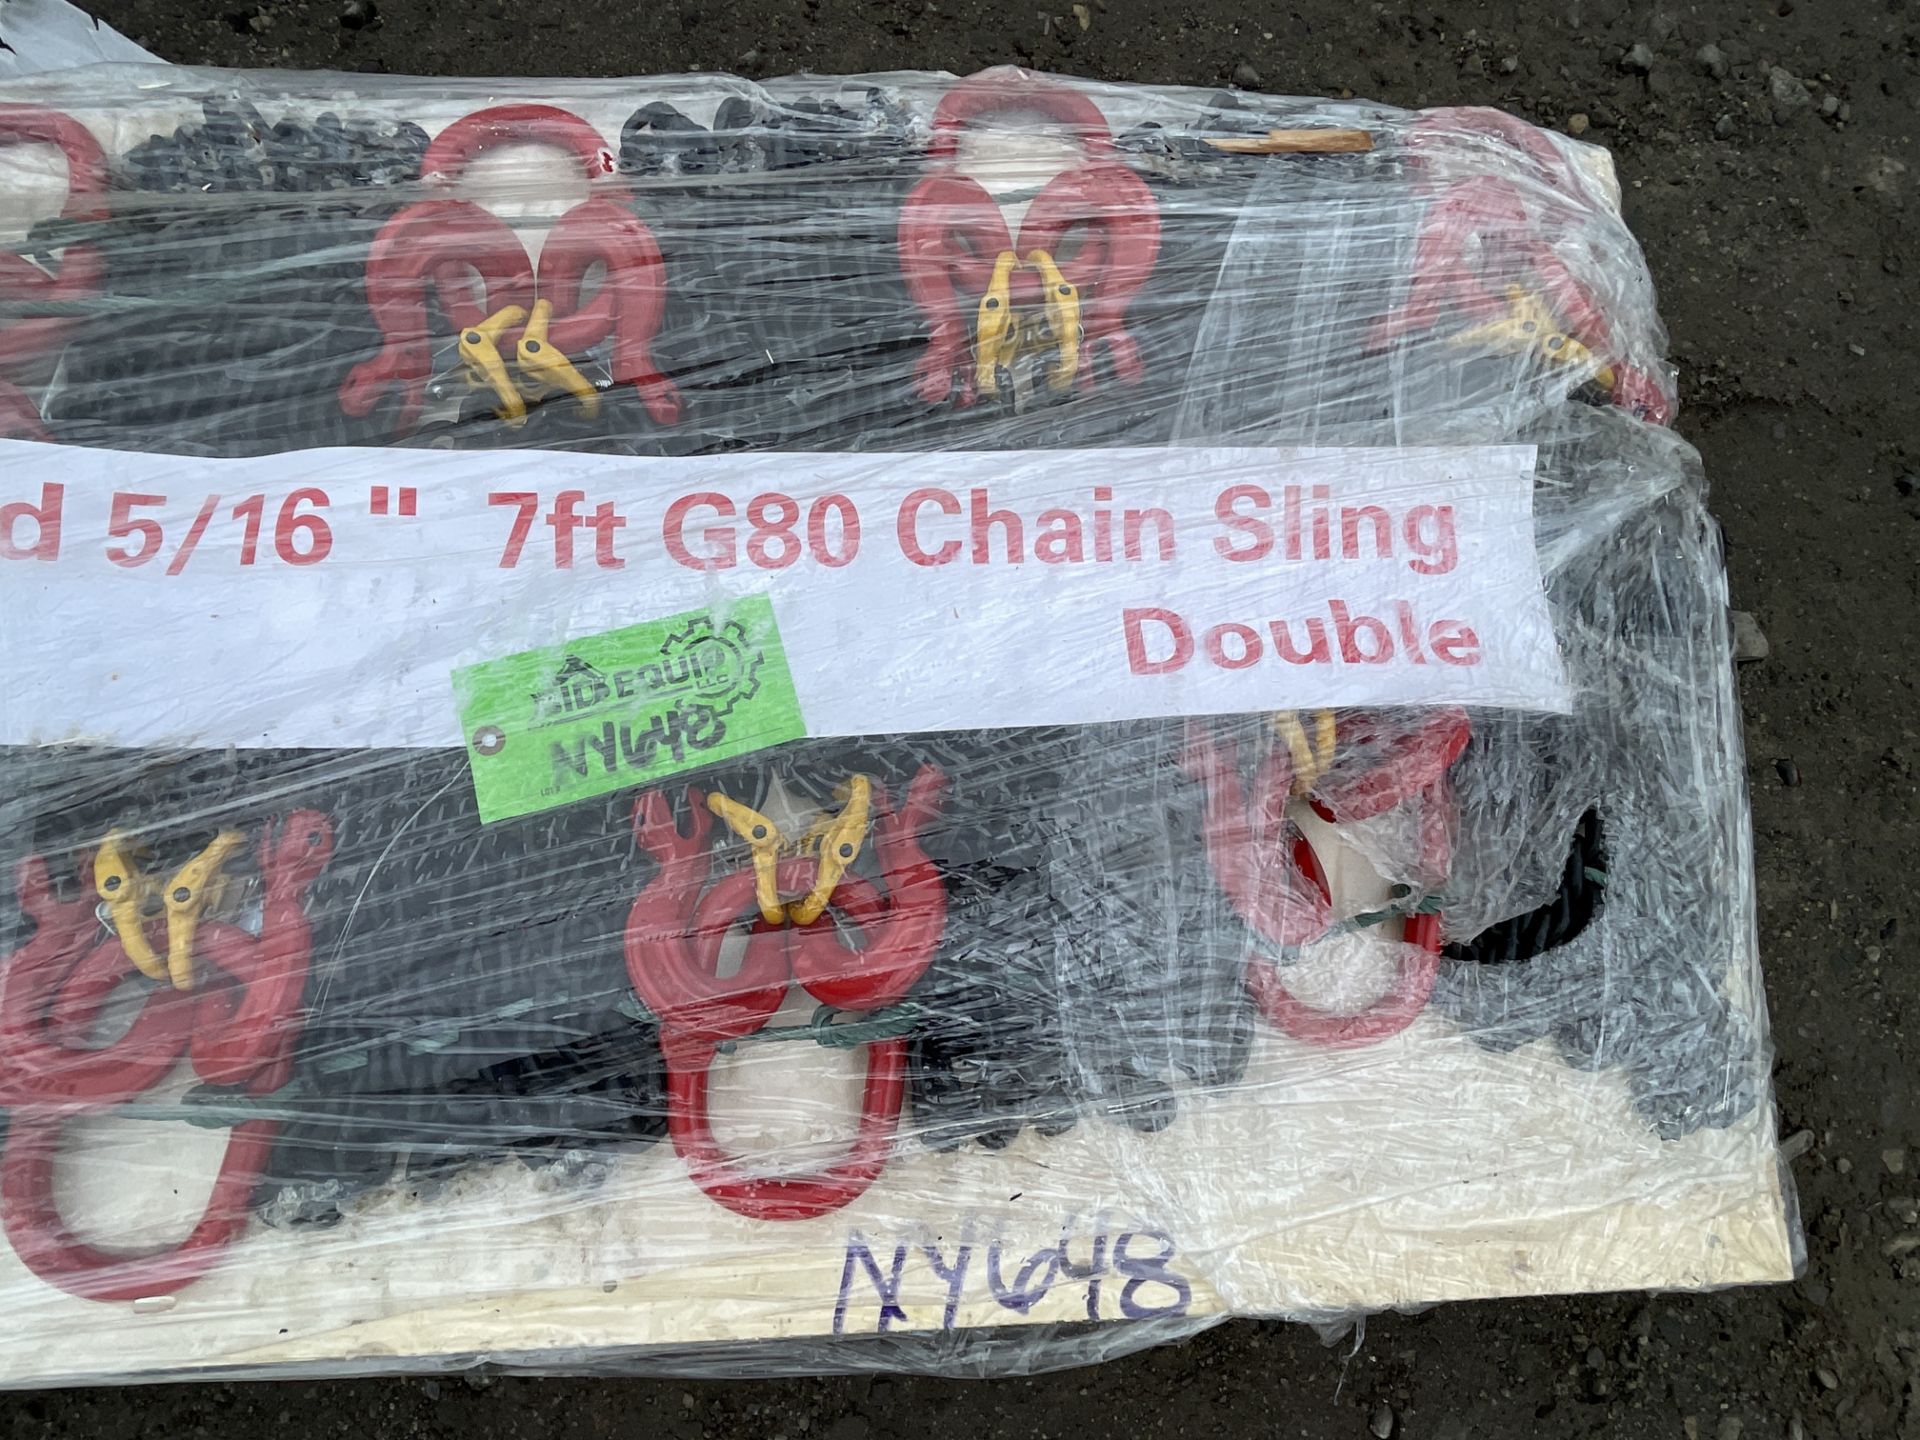 Brand New 5/16" 7ft G80 Double Chain Sling (NY648) - Image 4 of 5